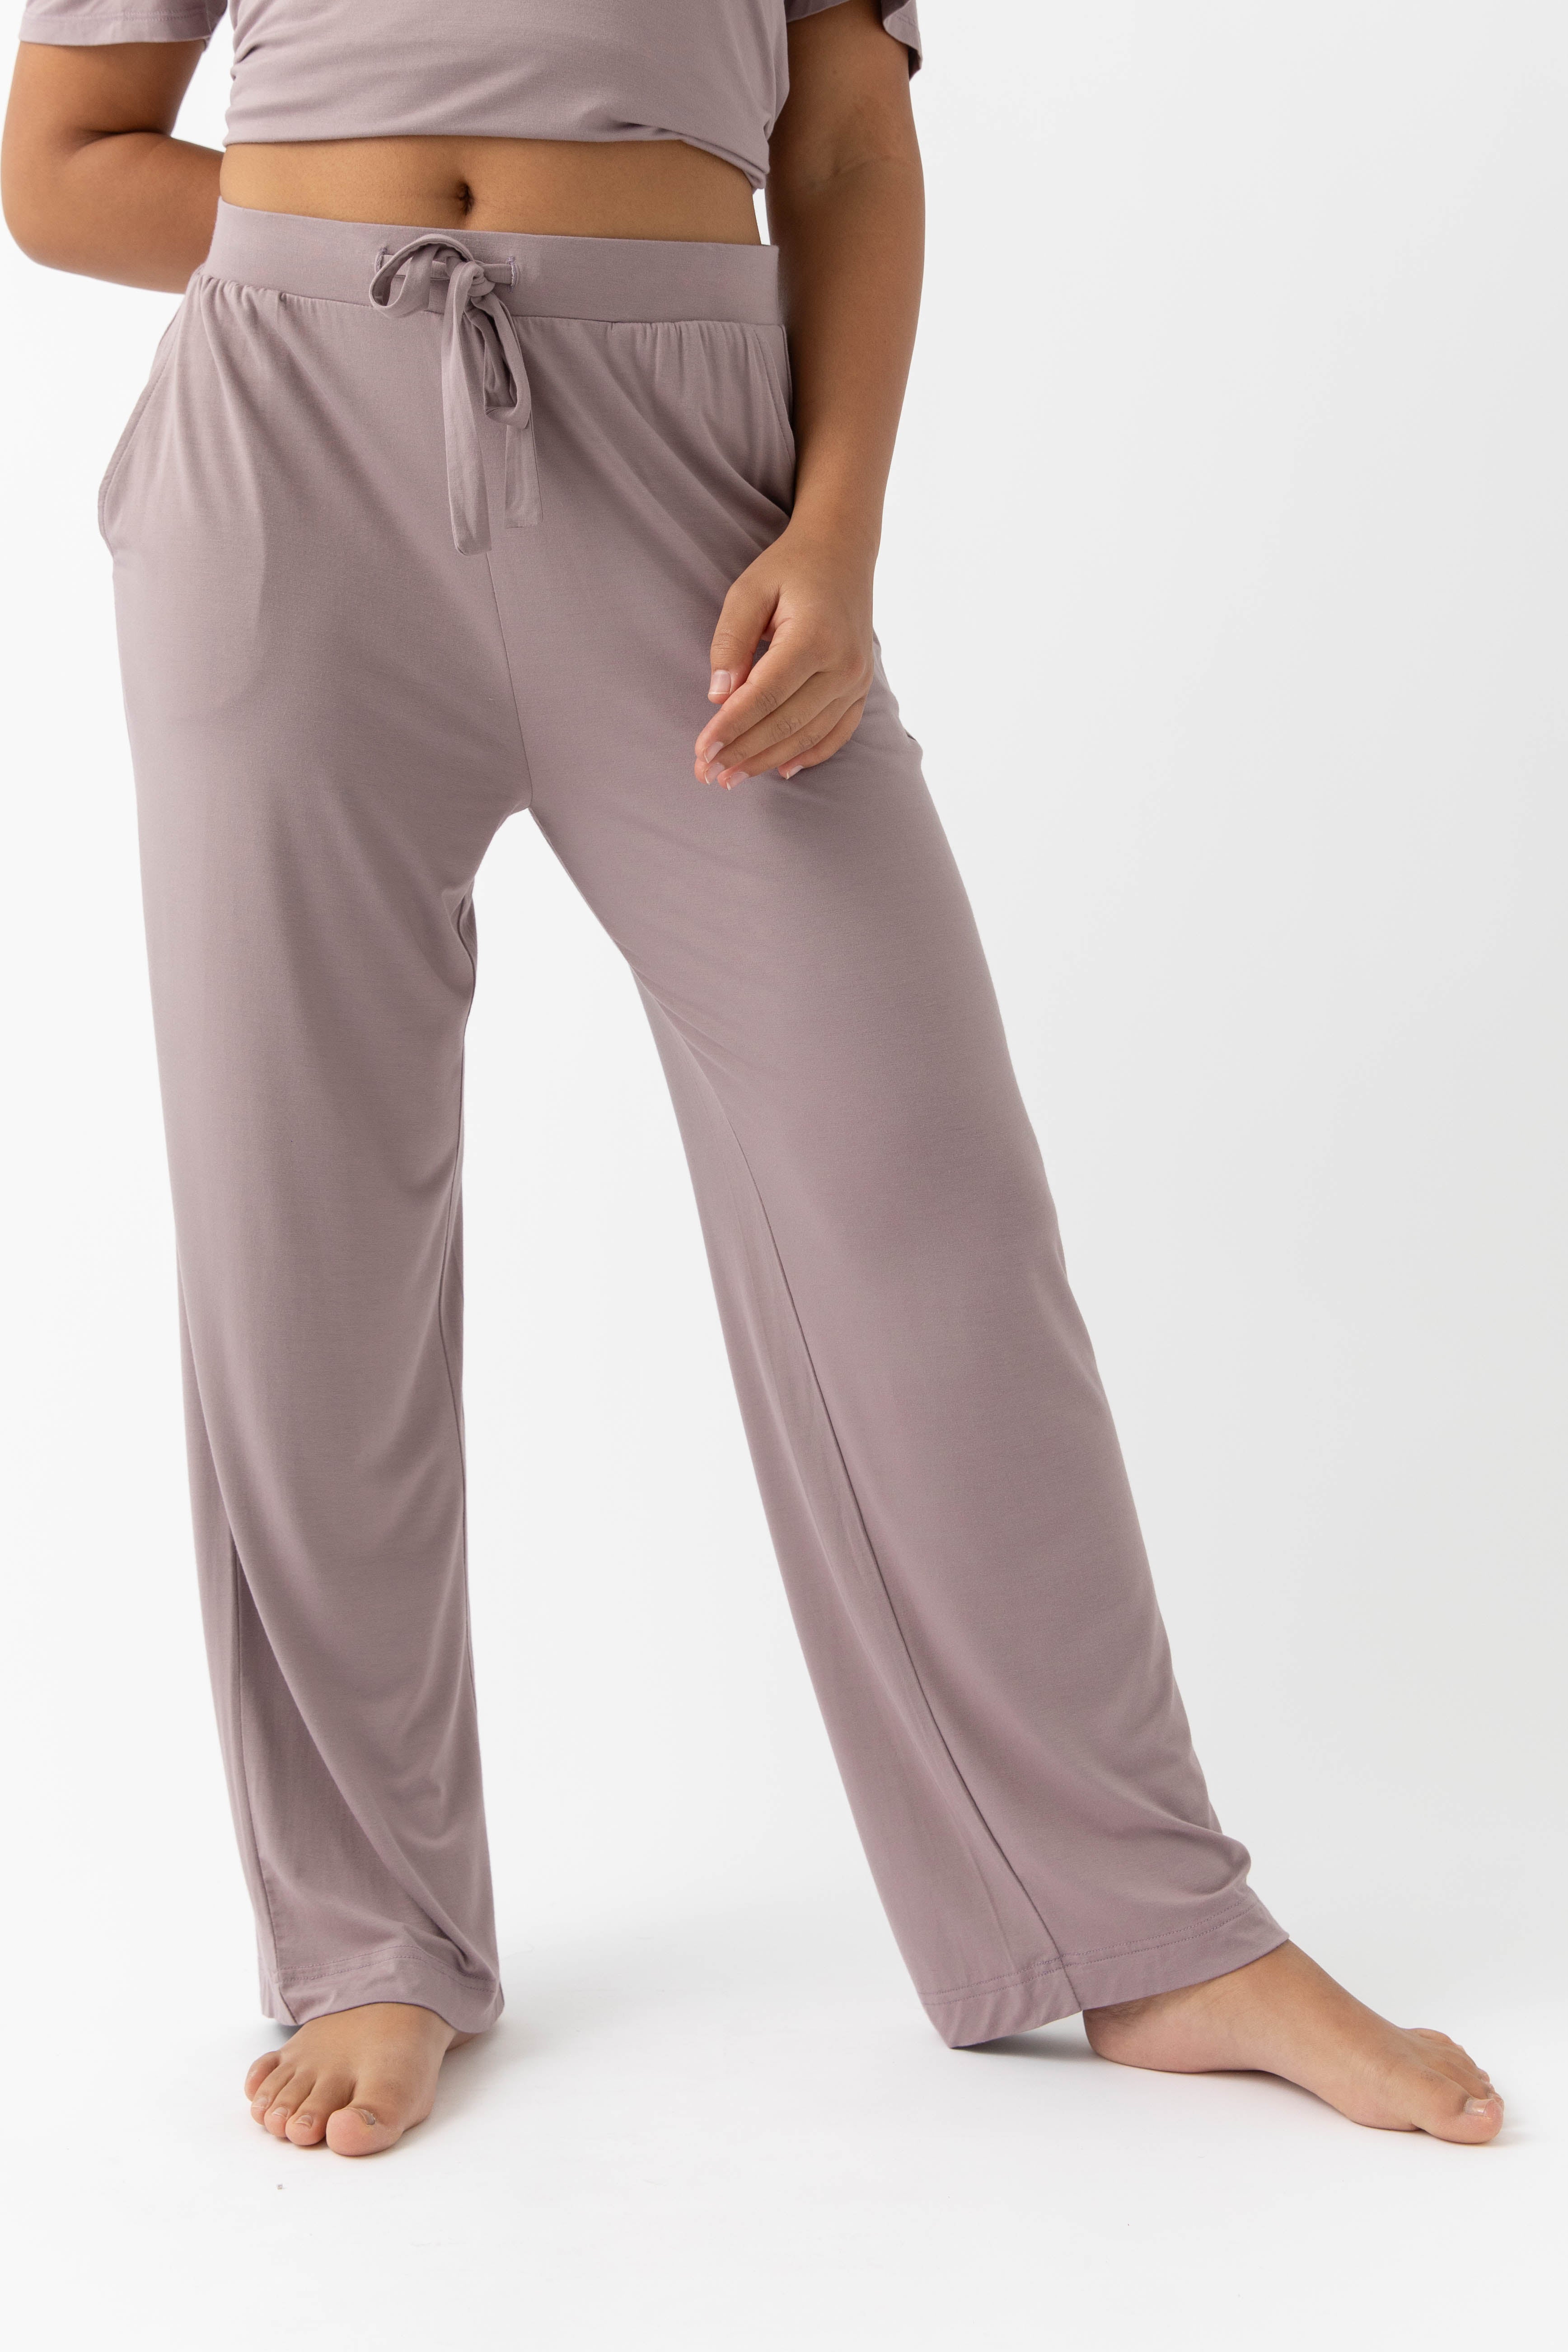 Stretch Knit Bamboo Pant